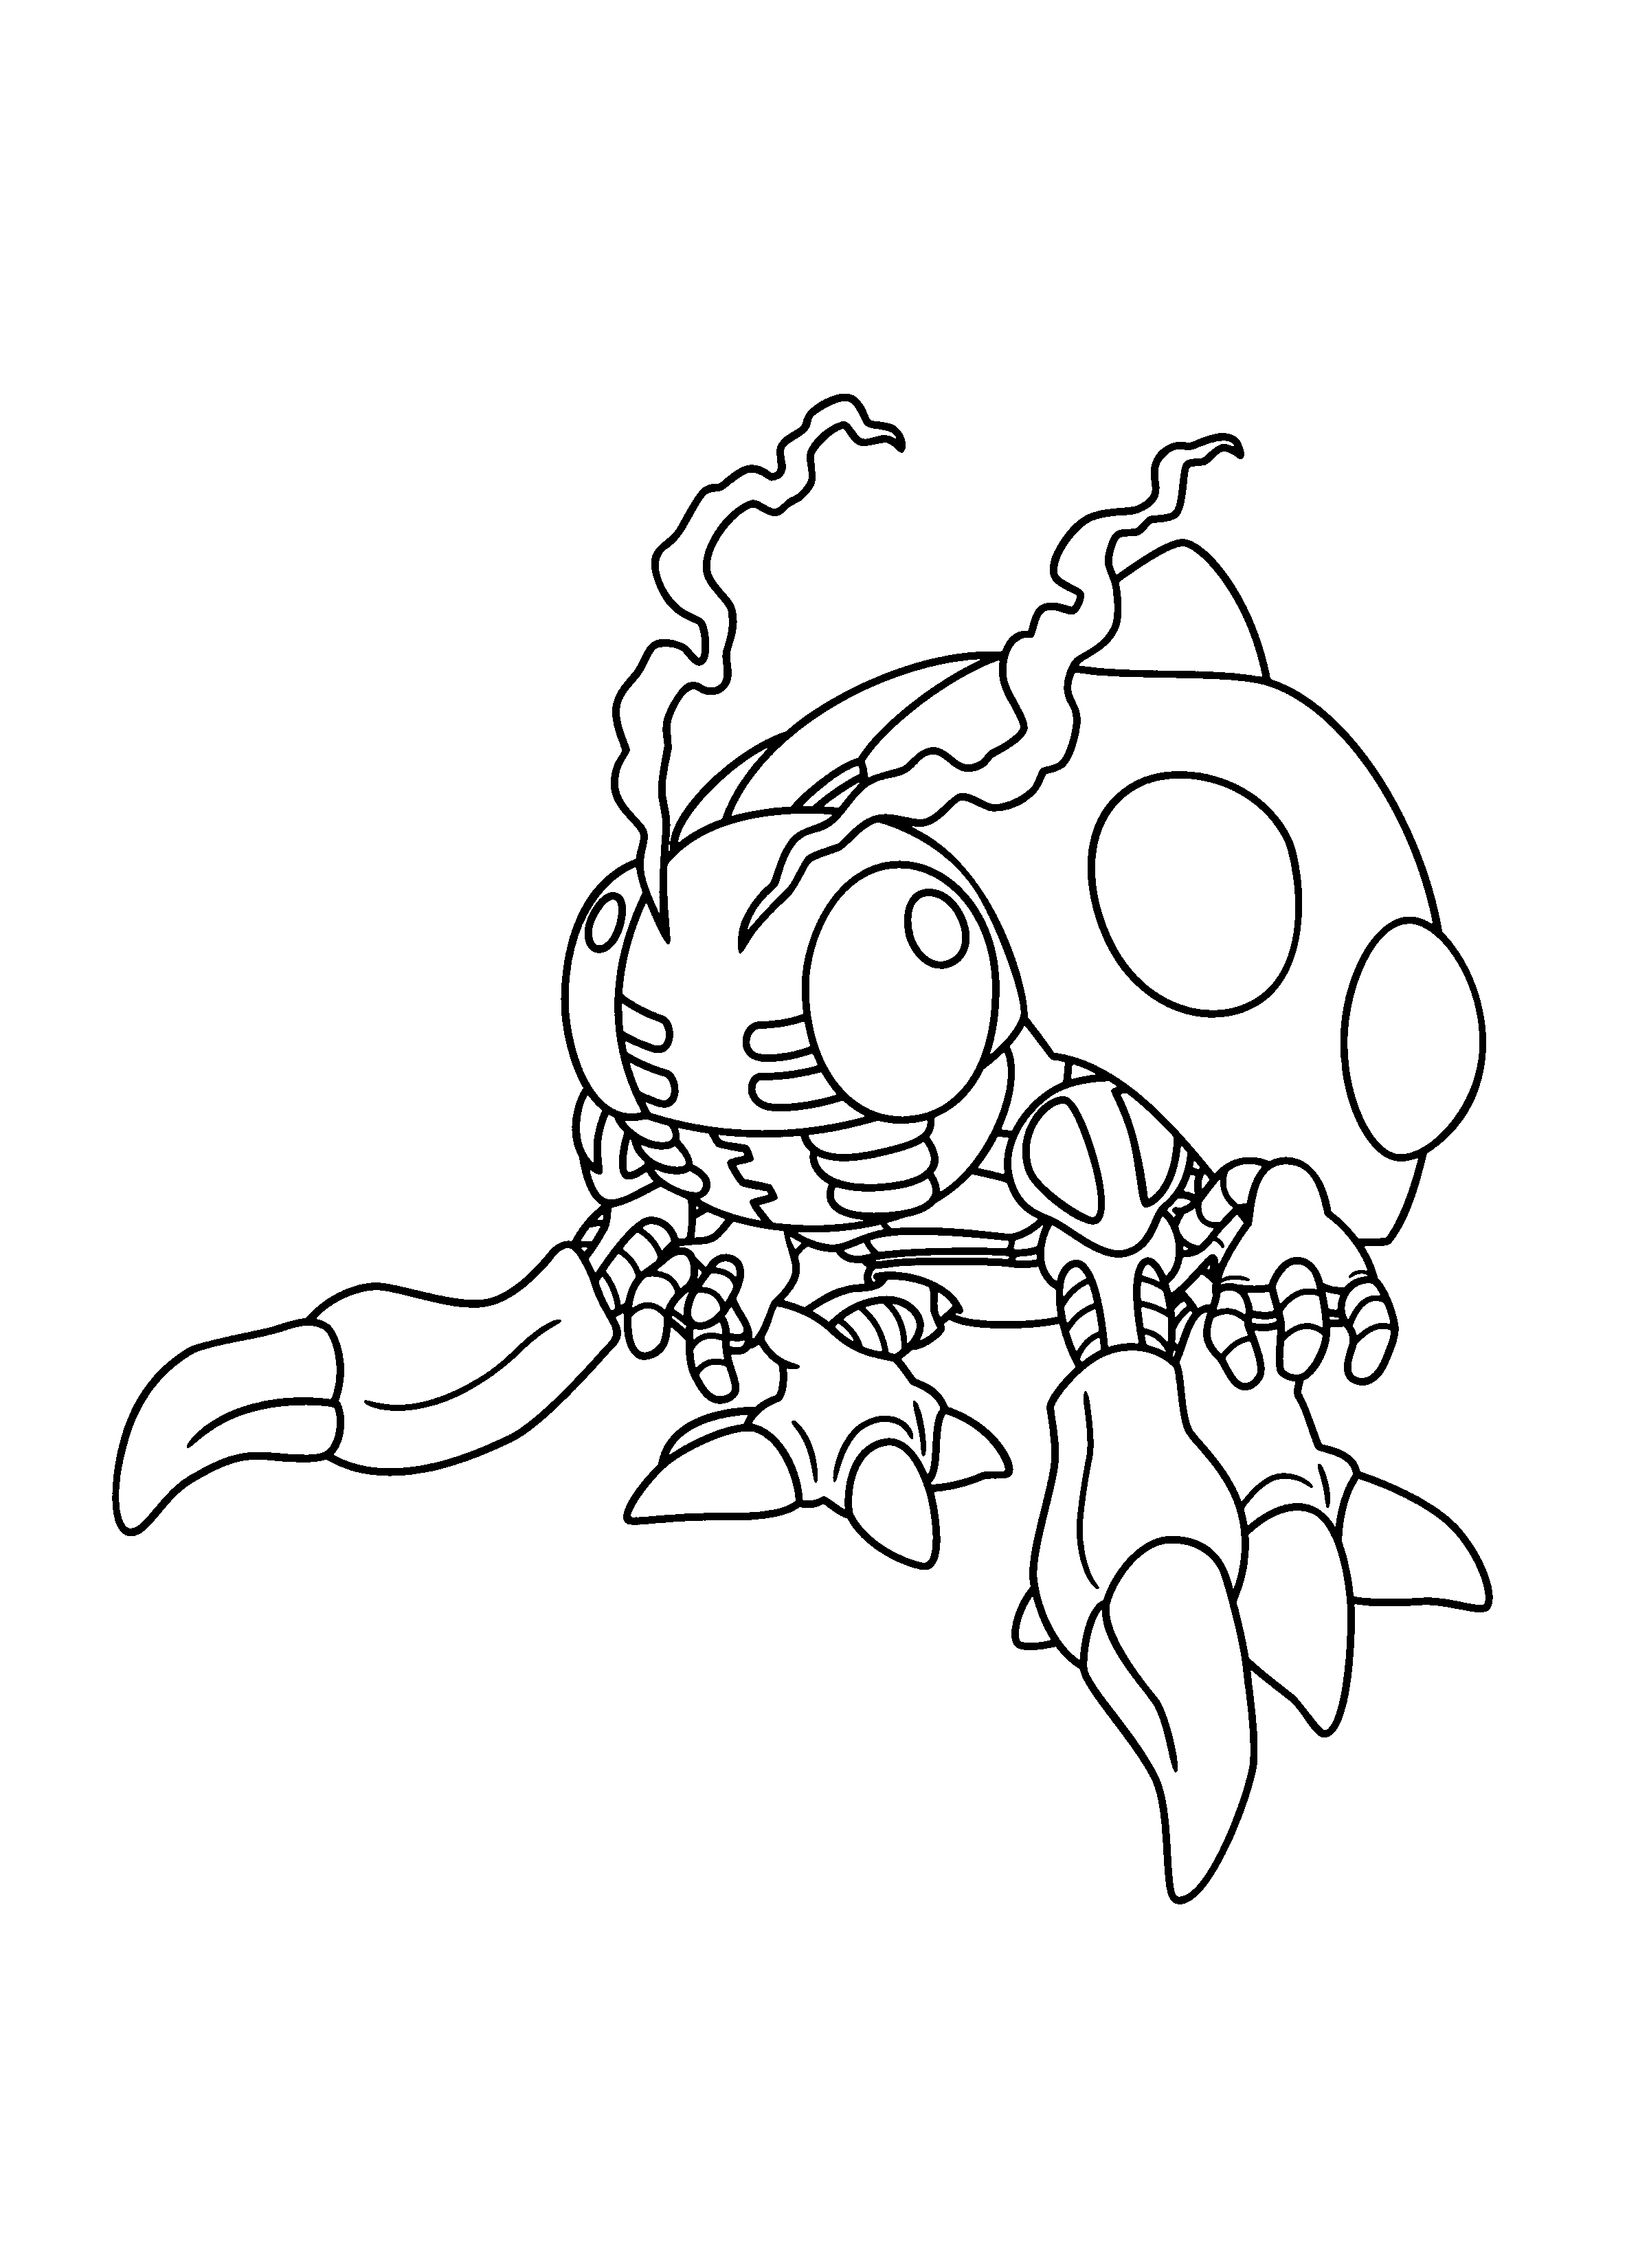 Digimon #34 (Cartoons) – Printable coloring pages